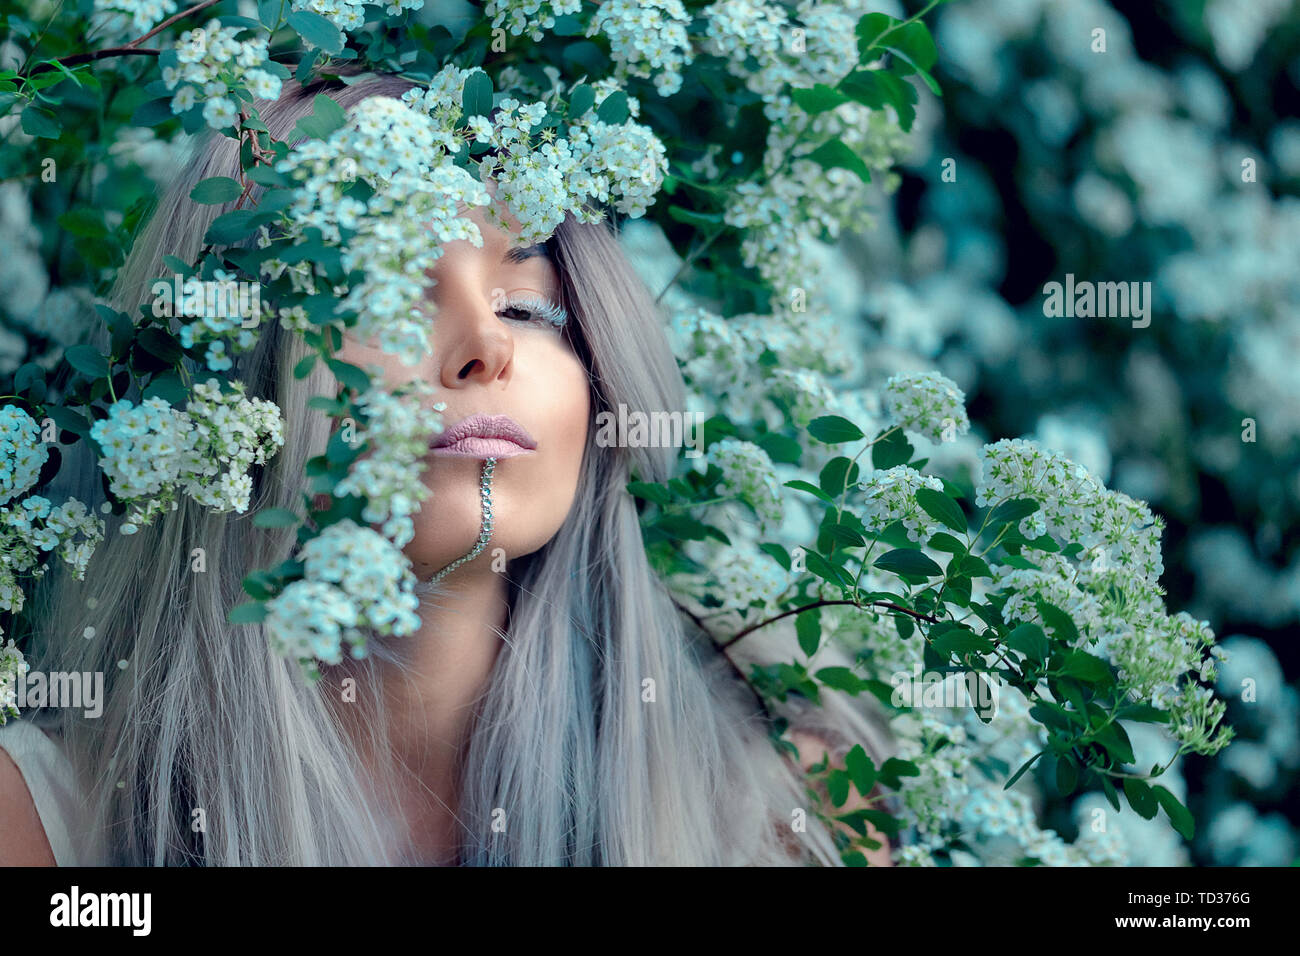 Fairy-tail forest nymph, beautiful sexy woman with white hair at spring garden, sitting on blooming tree, vintage dreamy fashion style Stock Photo